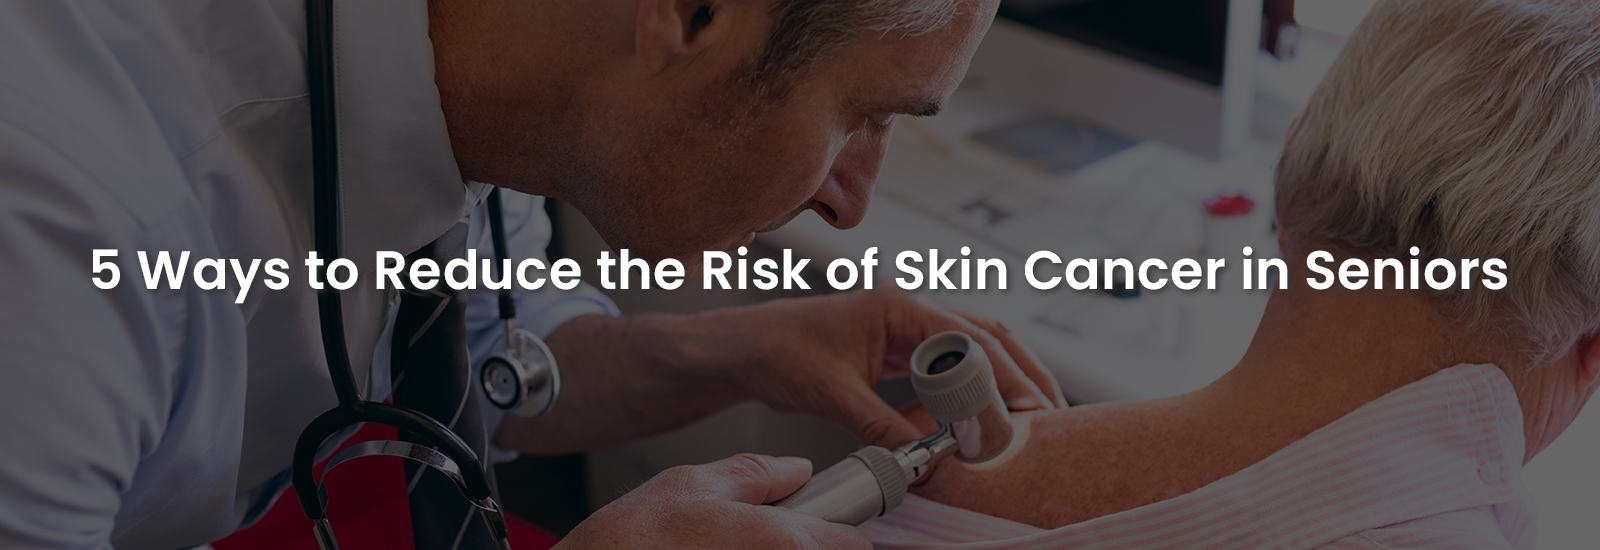 5 Ways to Reduce the Risk of Skin Cancer in Seniors | Banner Image